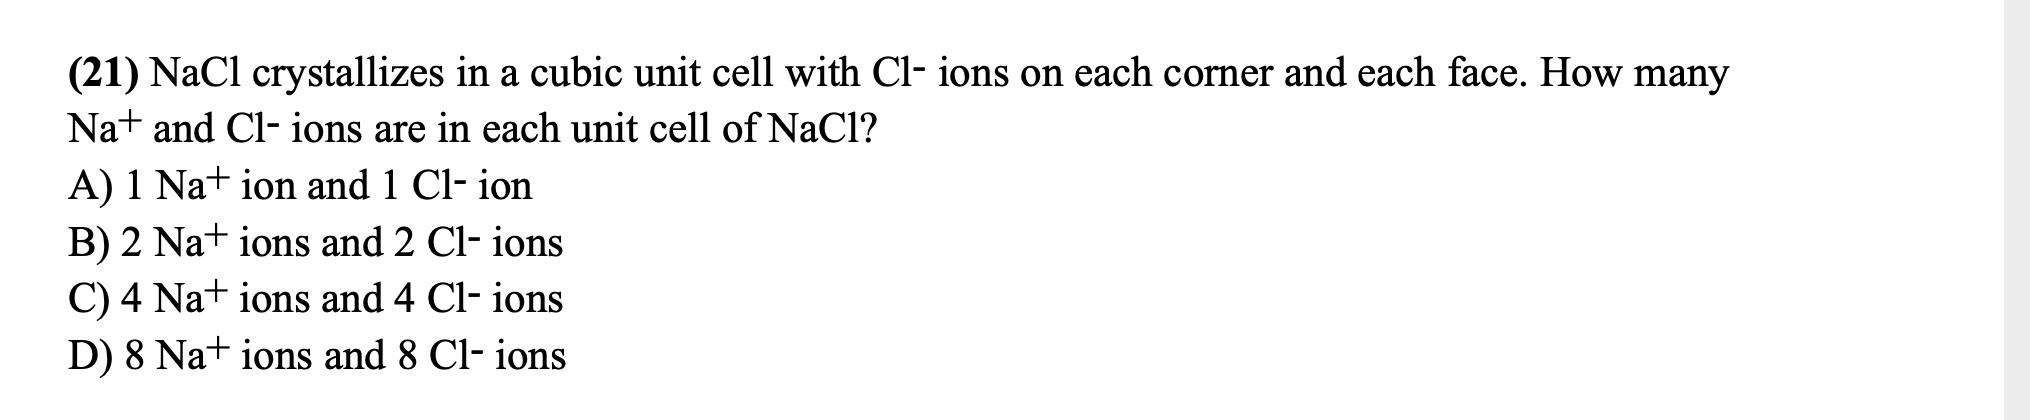 (21) NaCl crystallizes in a cubic unit cell with Cl- ions on each corner and each face. How many
Nat and Cl- ions are in each unit cell of NaCl?
A) 1 Nat ion and 1 Cl- ion
B) 2 Na+ ions and 2 Cl- ions
C) 4 Na+ ions and 4 Cl- ions
D) 8 Na+ ions and 8 Cl- ions
